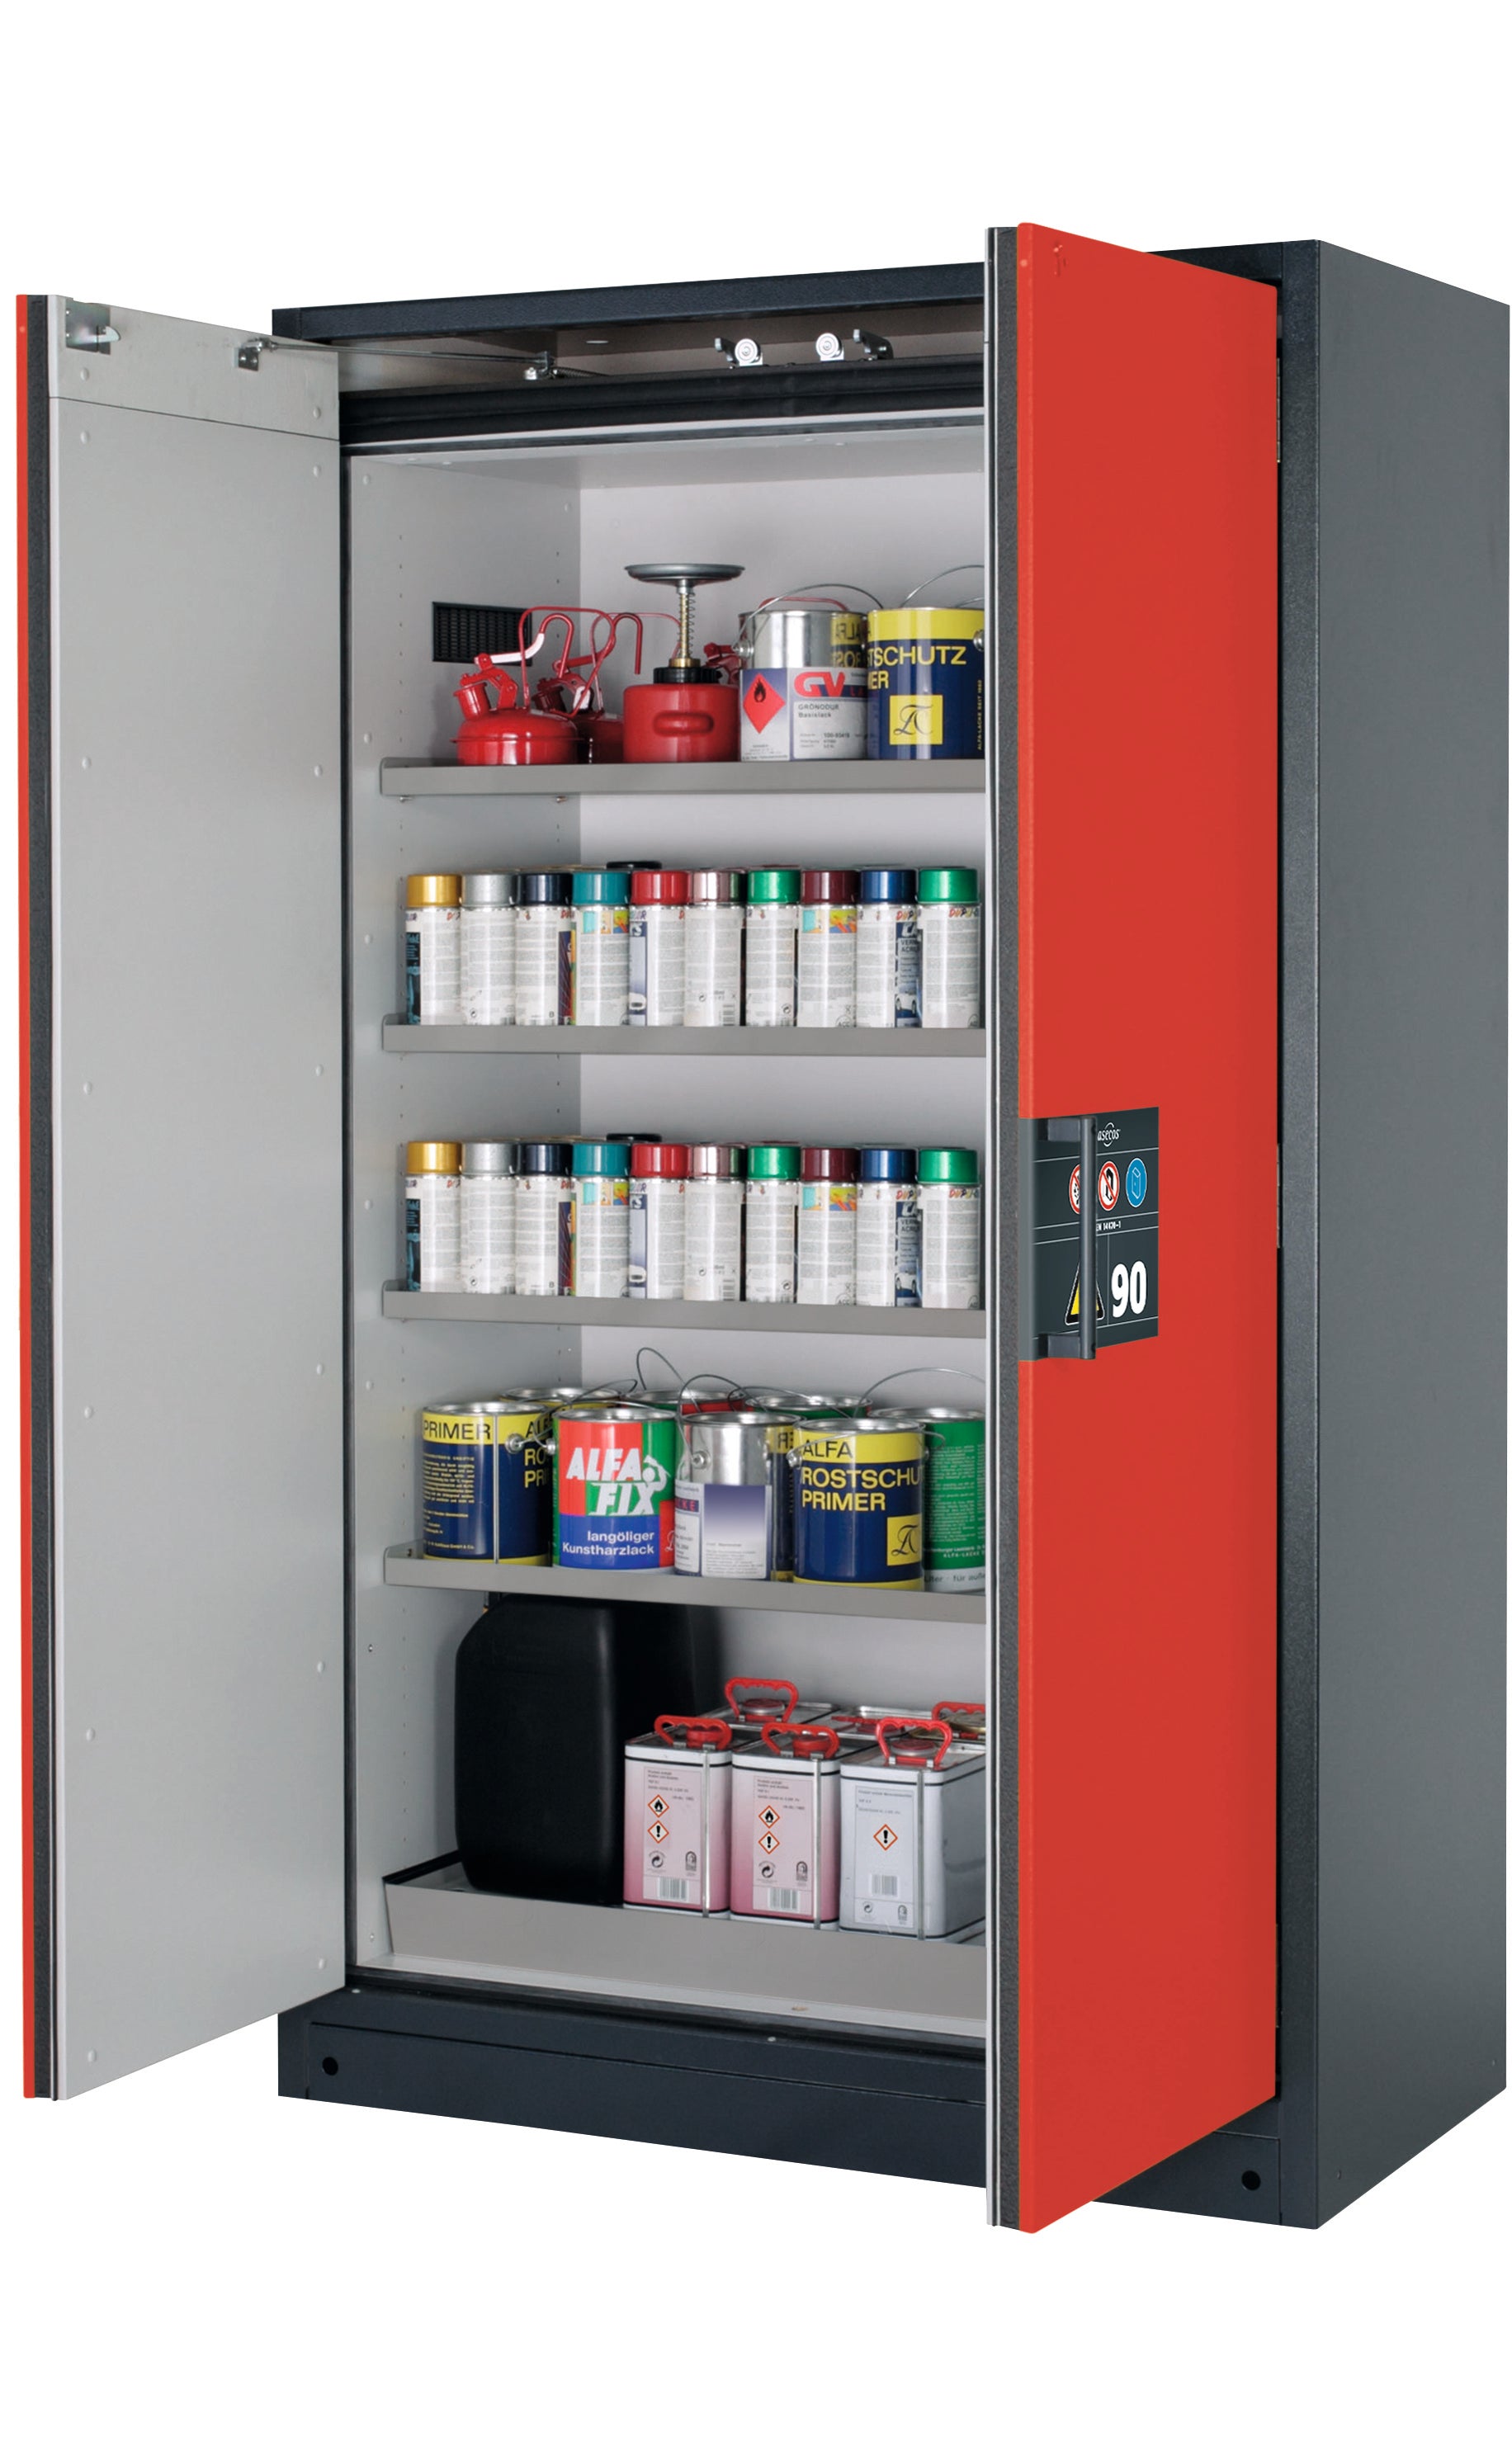 Type 90 safety storage cabinet Q-CLASSIC-90 model Q90.195.120 in traffic red RAL 3020 with 4x shelf standard (stainless steel 1.4301),